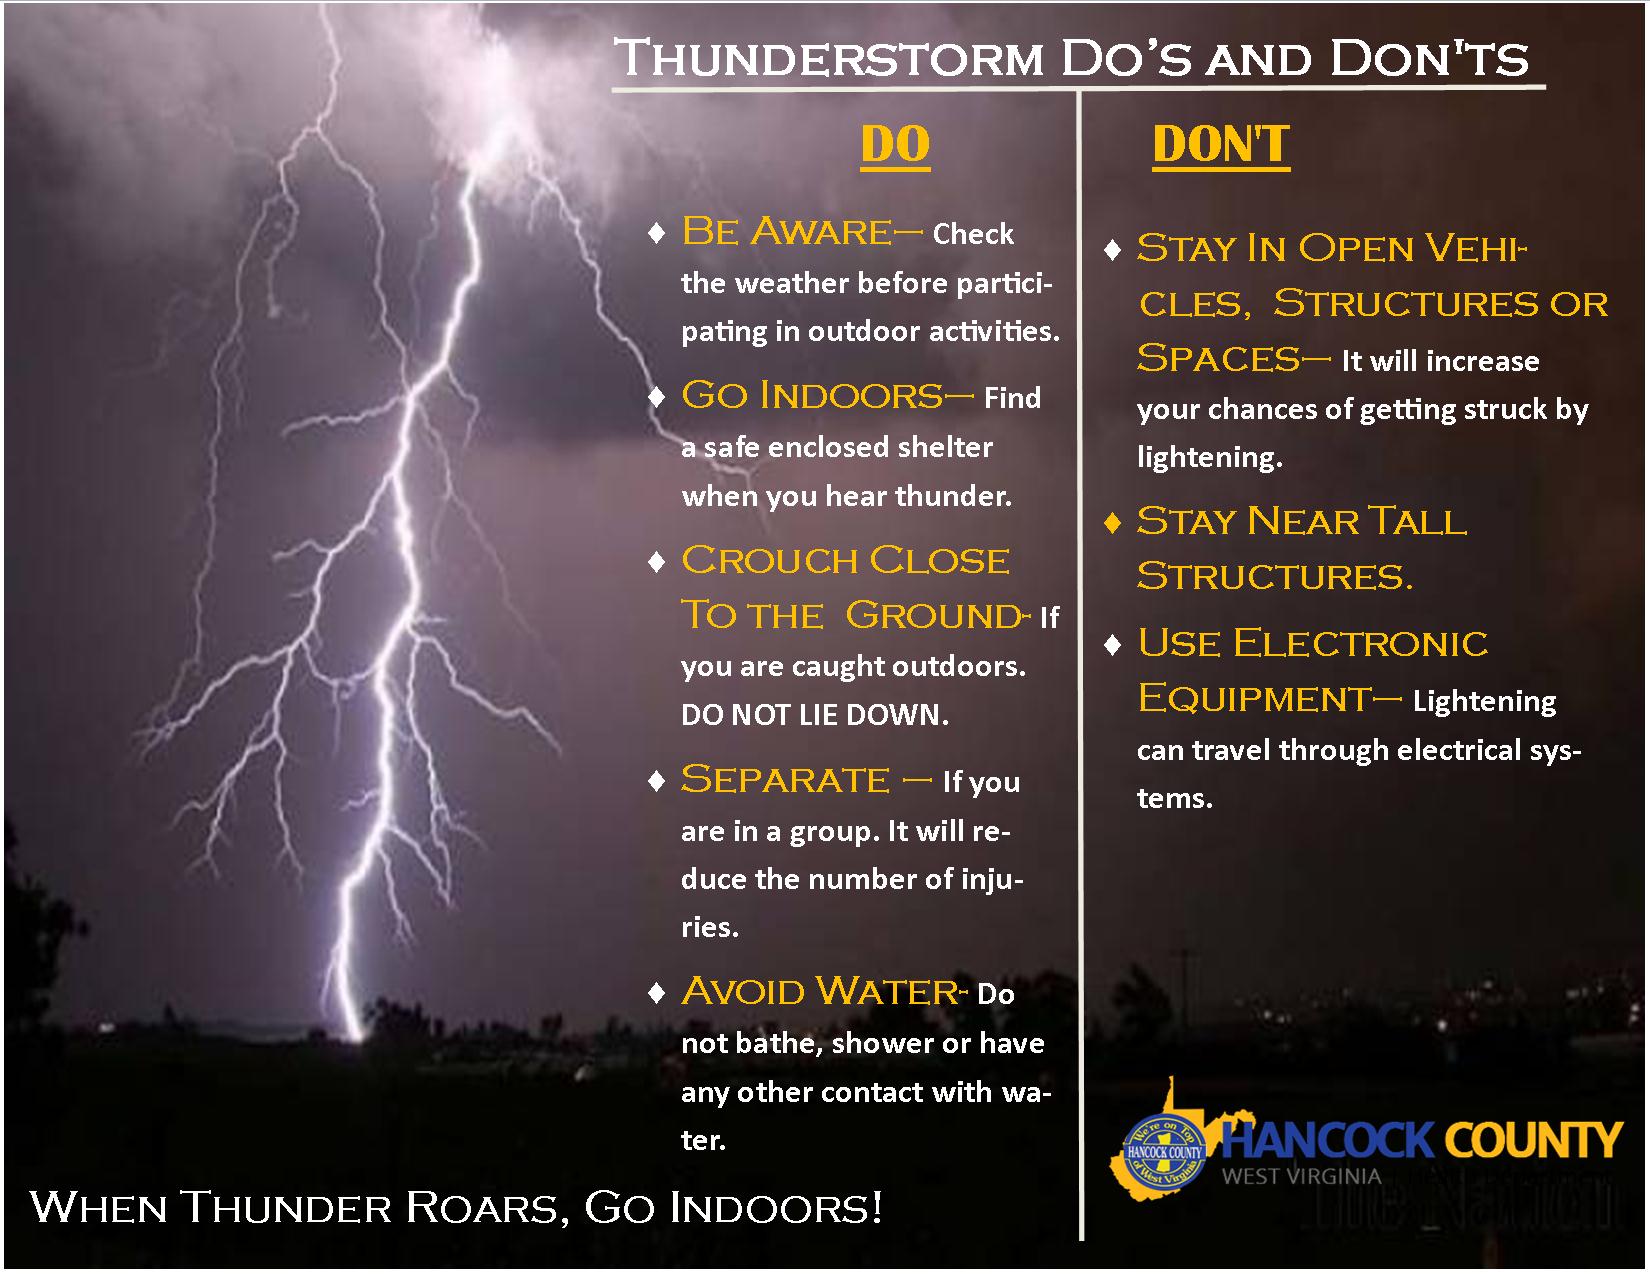 Thunderstorm Do's and Don'ts